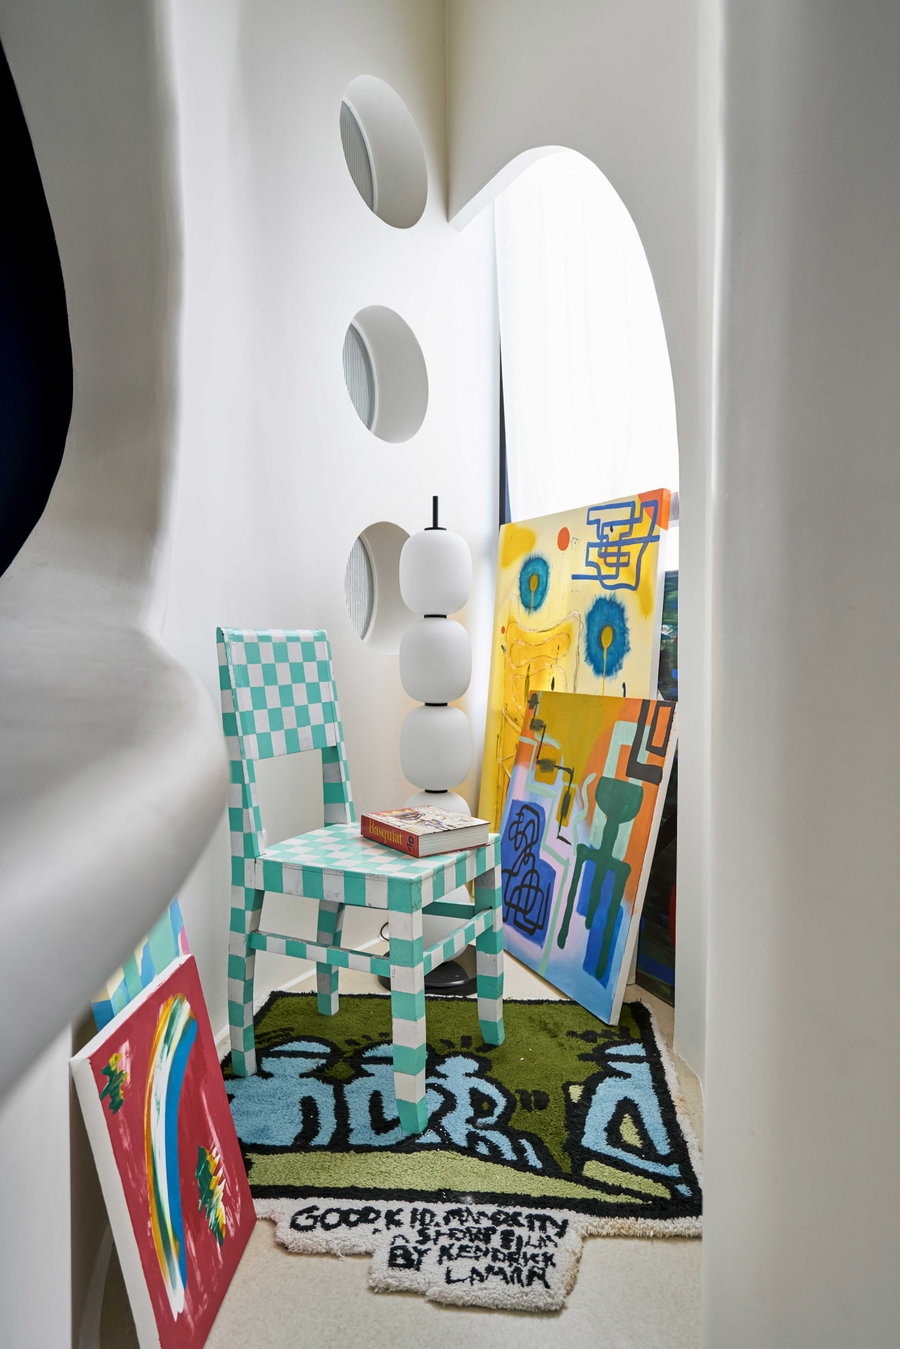 Colorful chairs, rugs, and artworks pop against the Dreamscape apartment's white walls and floors.